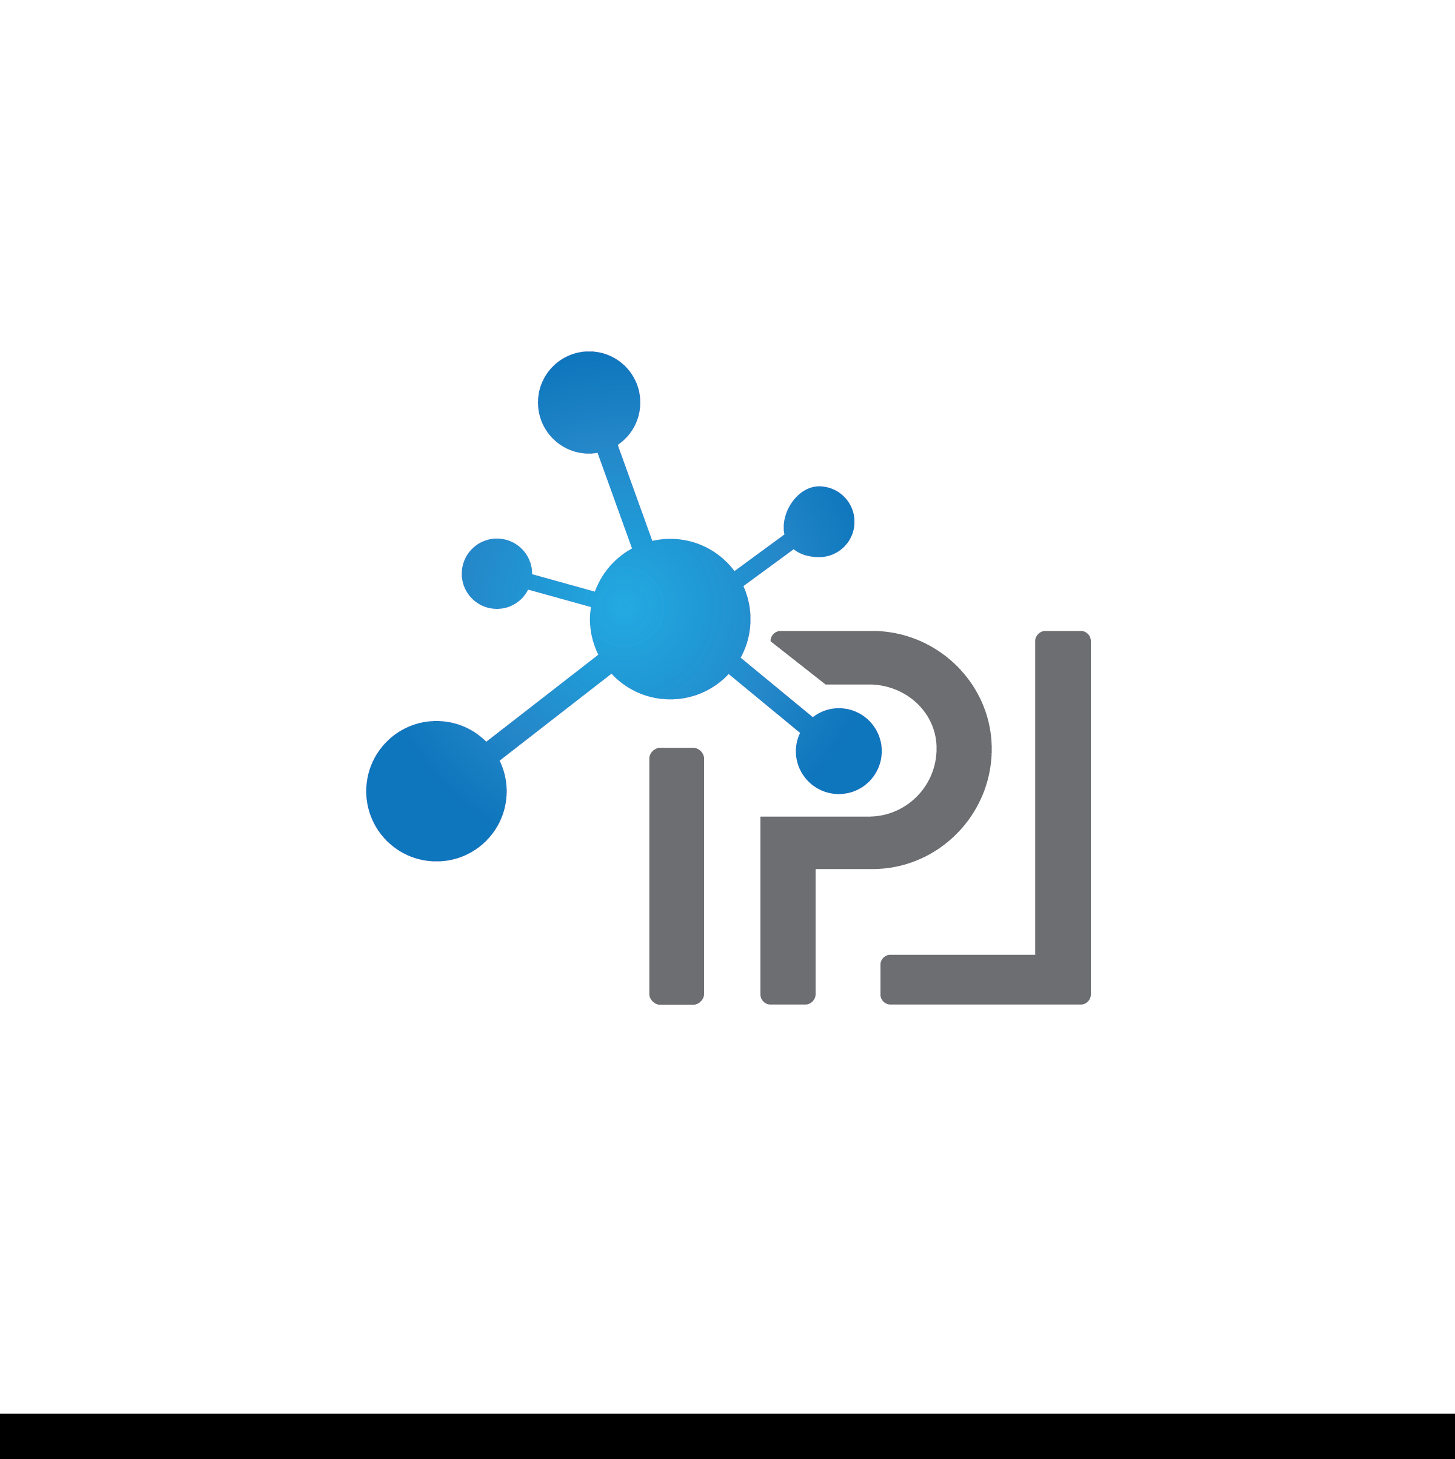 IPL Logo - Serious, Professional, Business Logo Design for IPL by Knockout ...